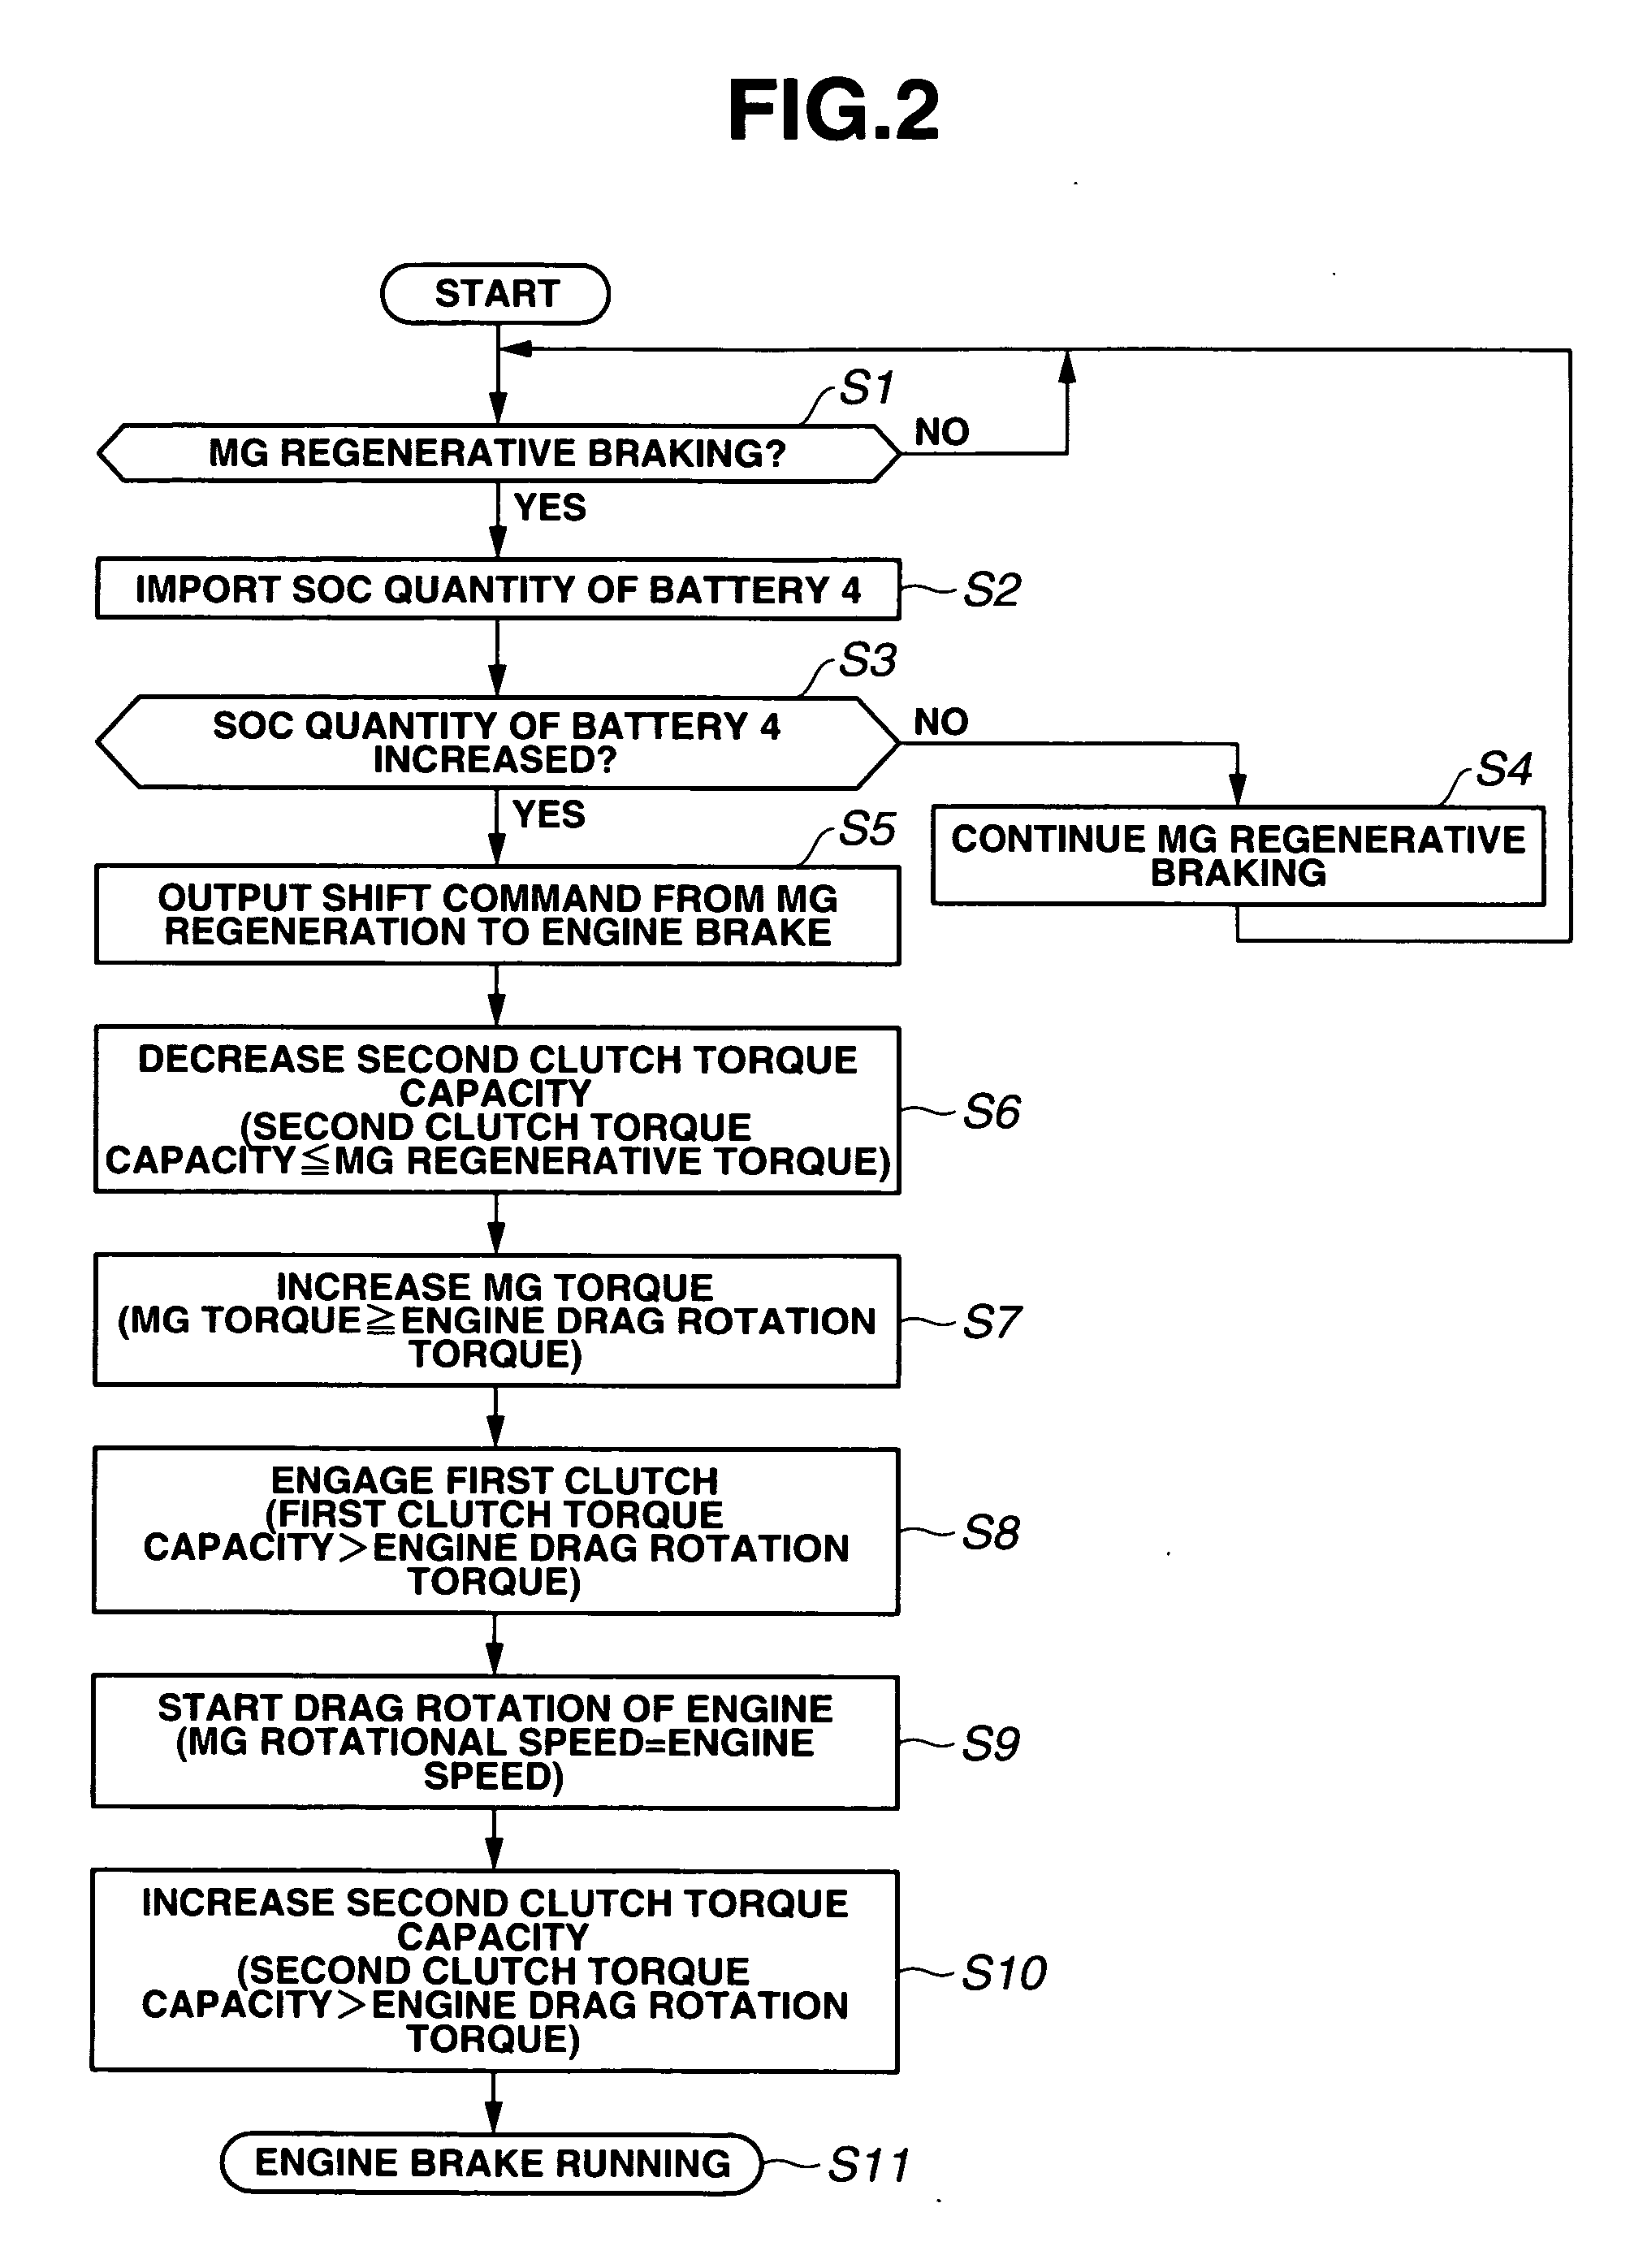 Mode transition control system for hybrid vehicle